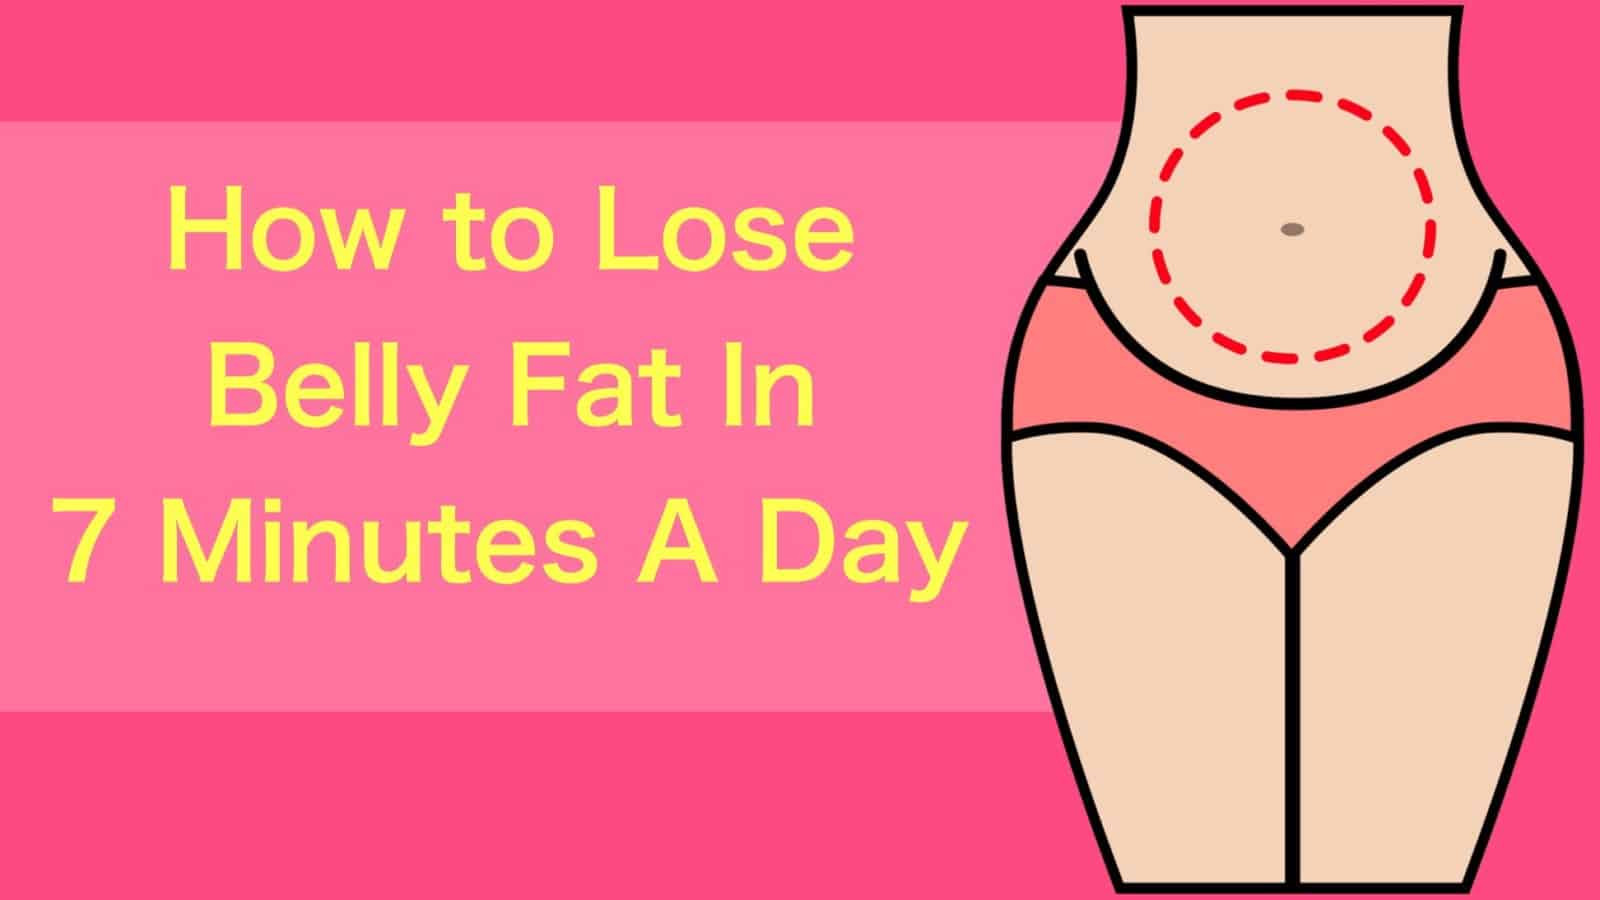 How To Lose Belly Fat In One Day
 How to Lose Belly Fat In 7 Minutes A Day